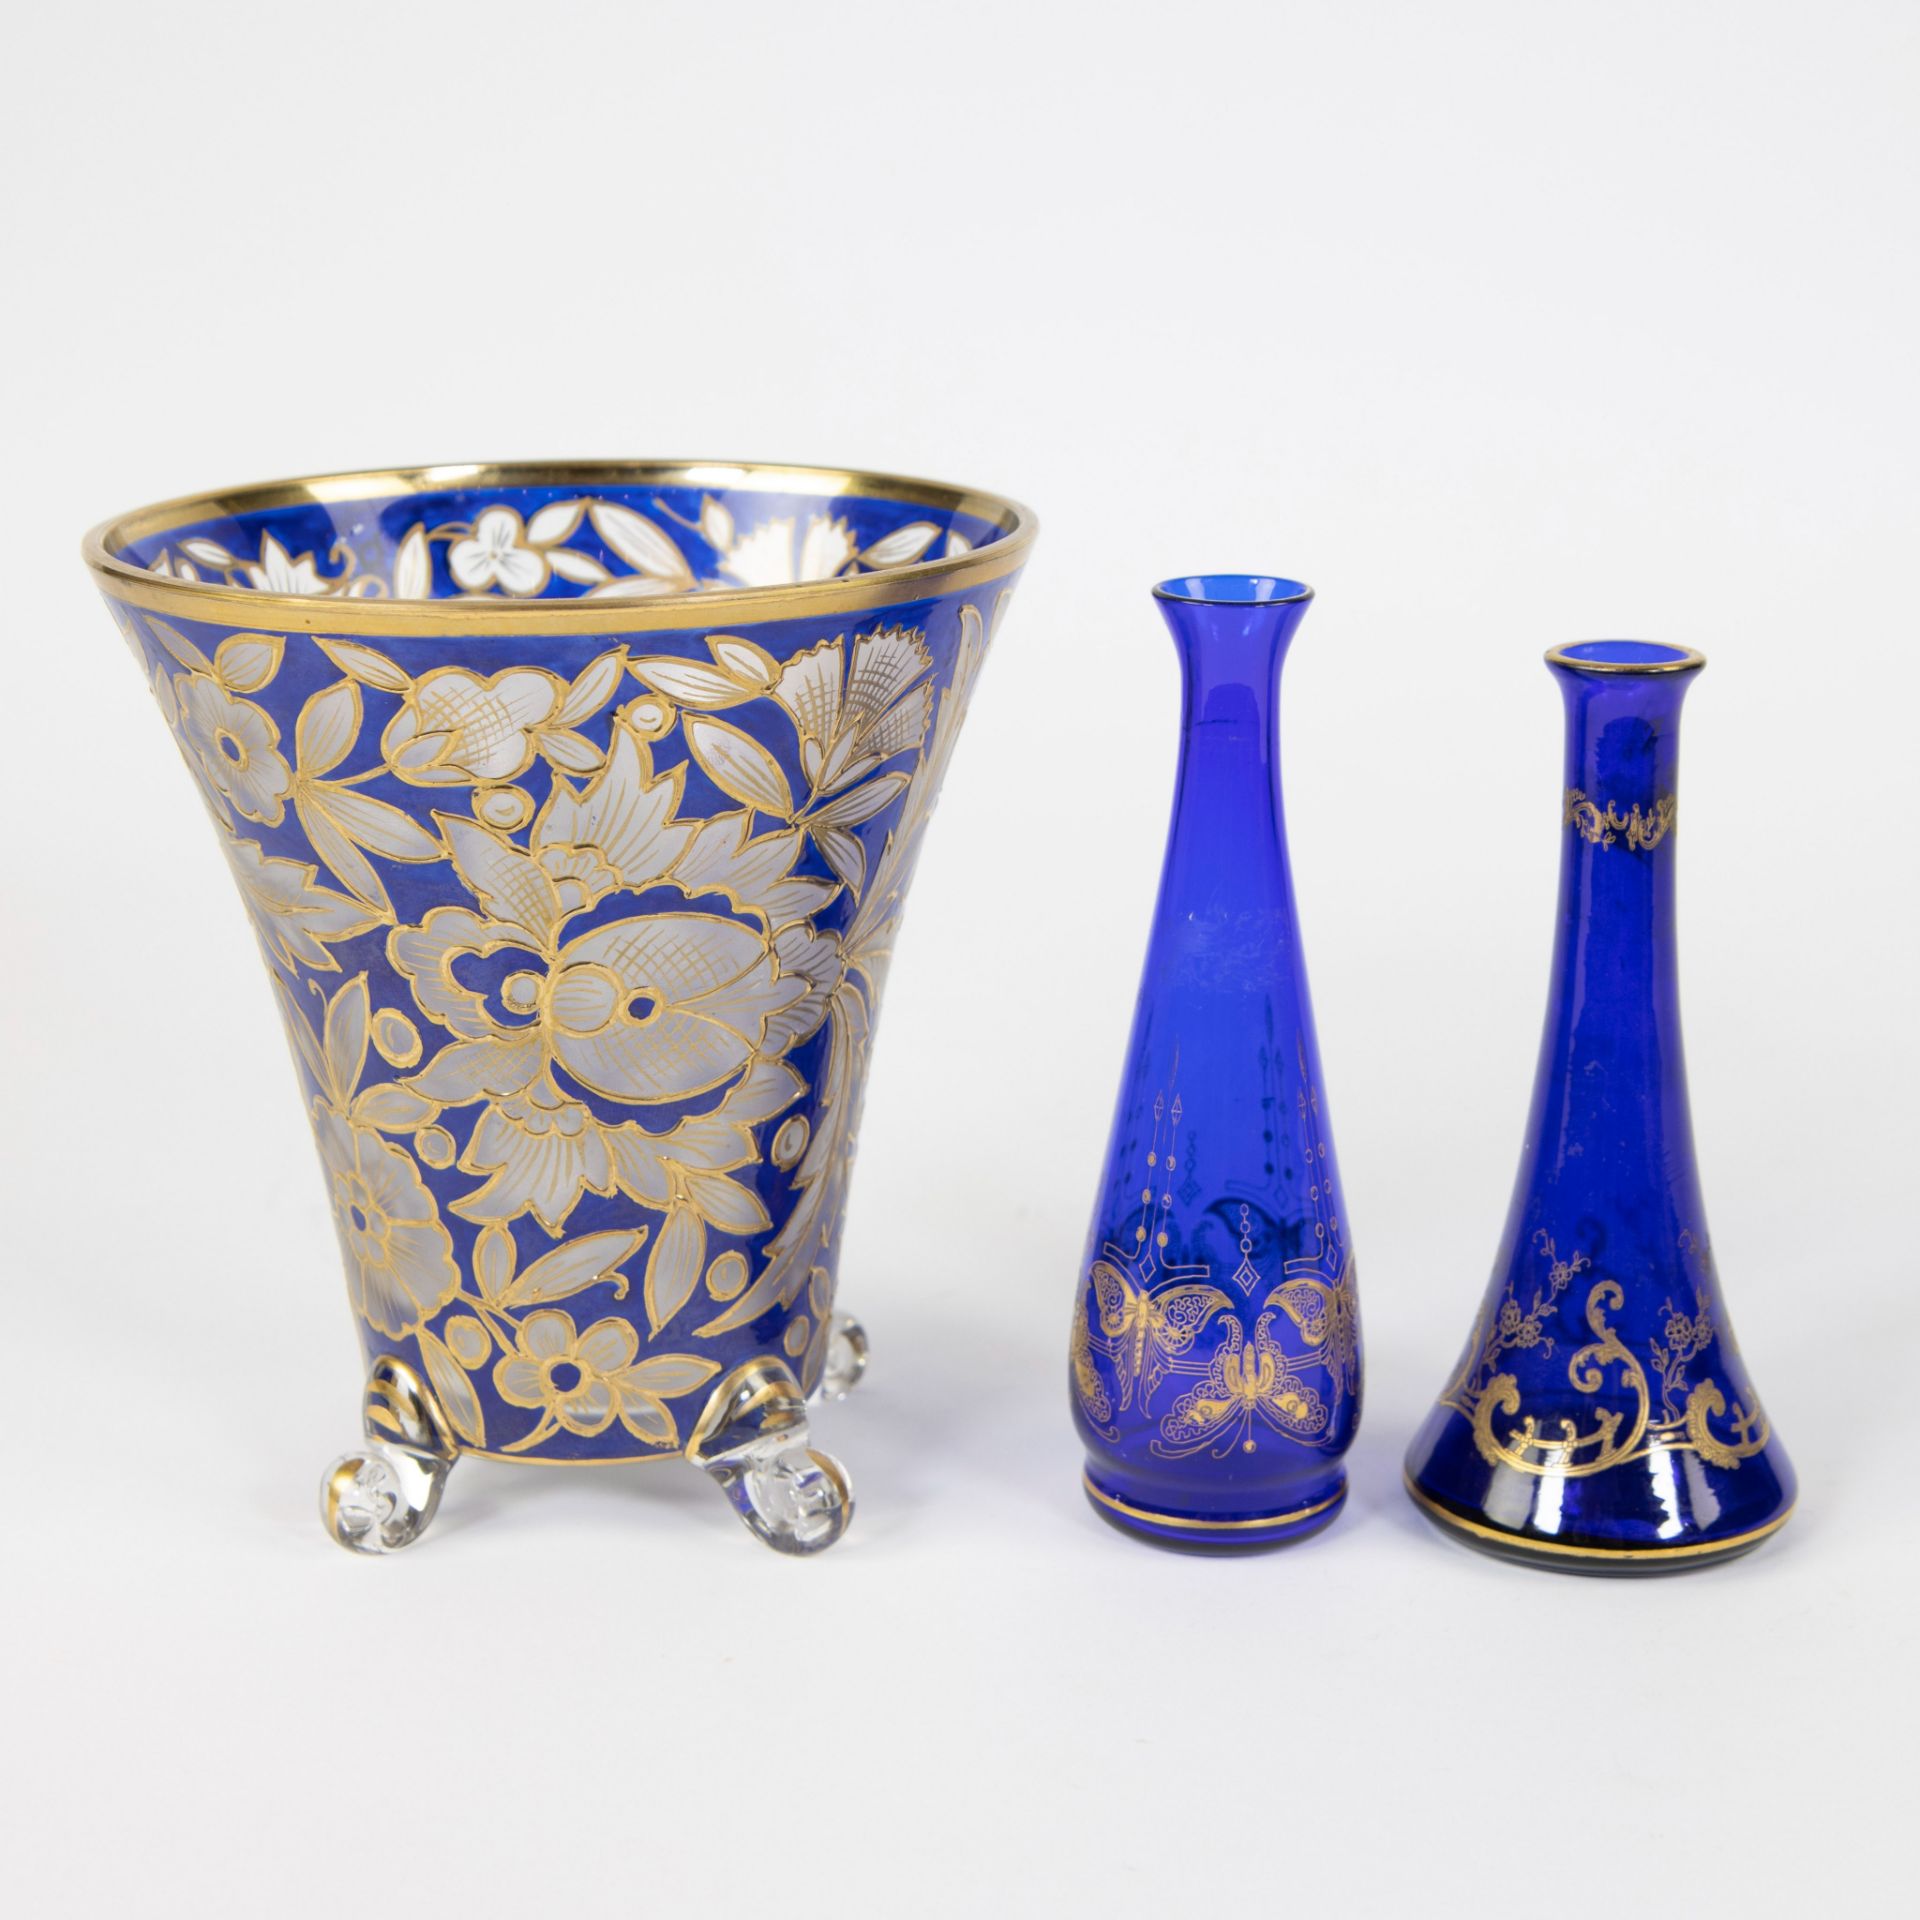 Val Saint Lambert Art Nouveau vase (2) blue with finely decorated decor and 19th century coupe with